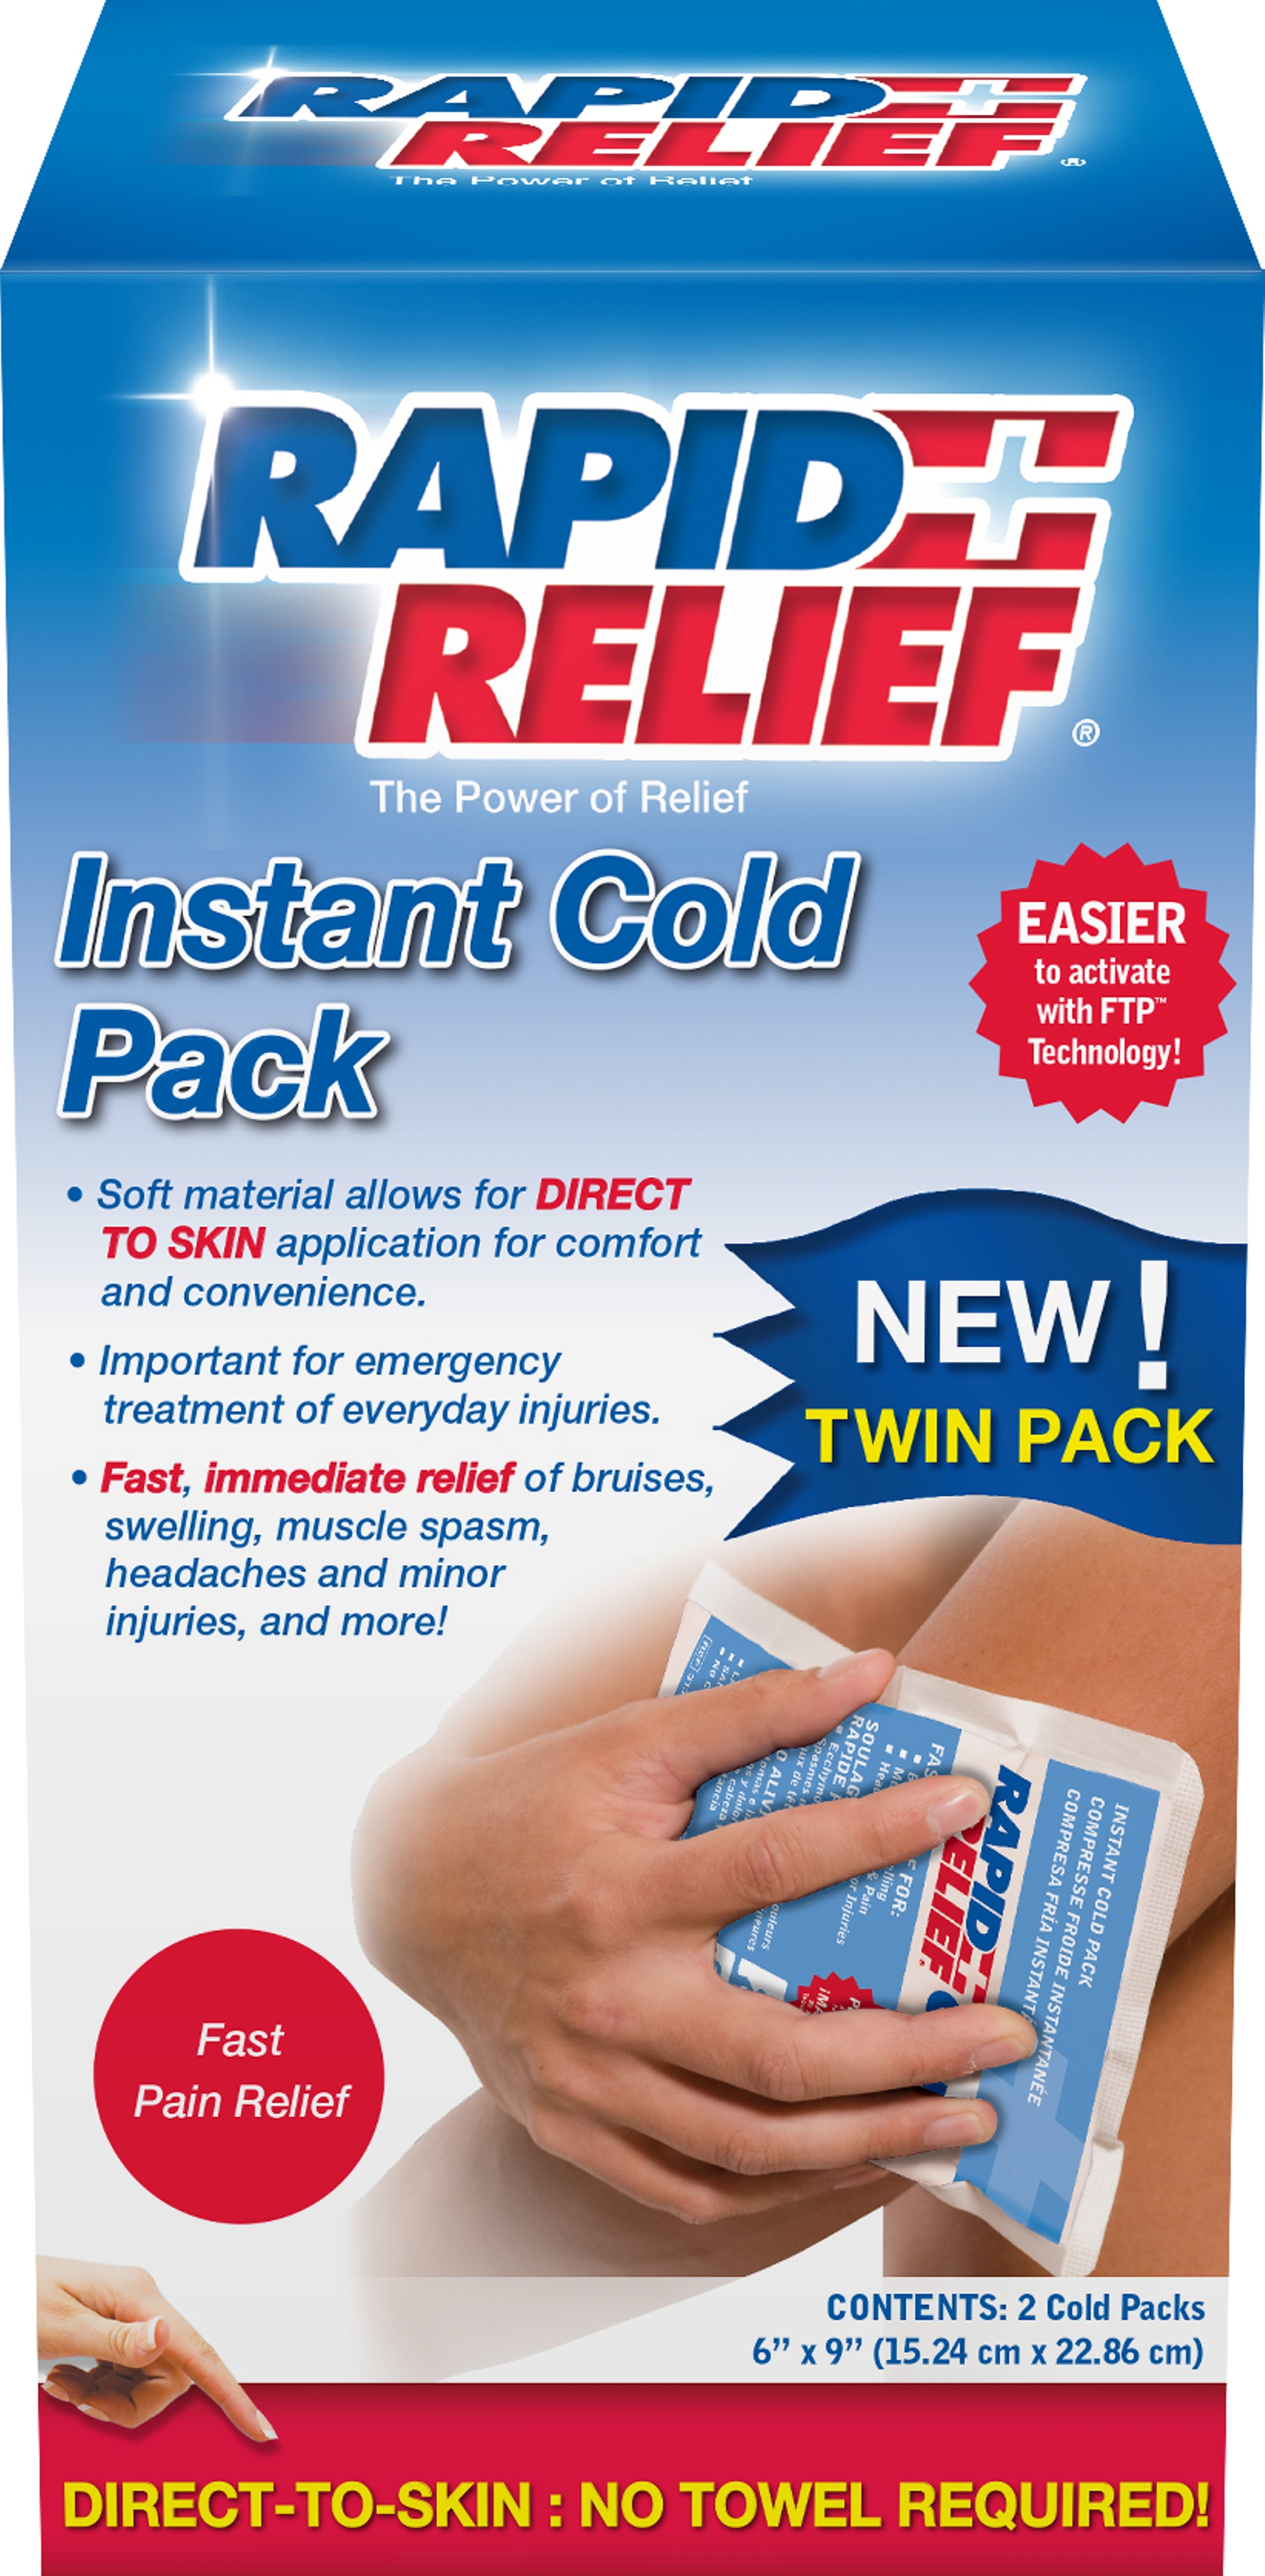 Rapid Relief Instant Cold Twin Pack  2 Ct (15.24 cm x 22.86 cm)